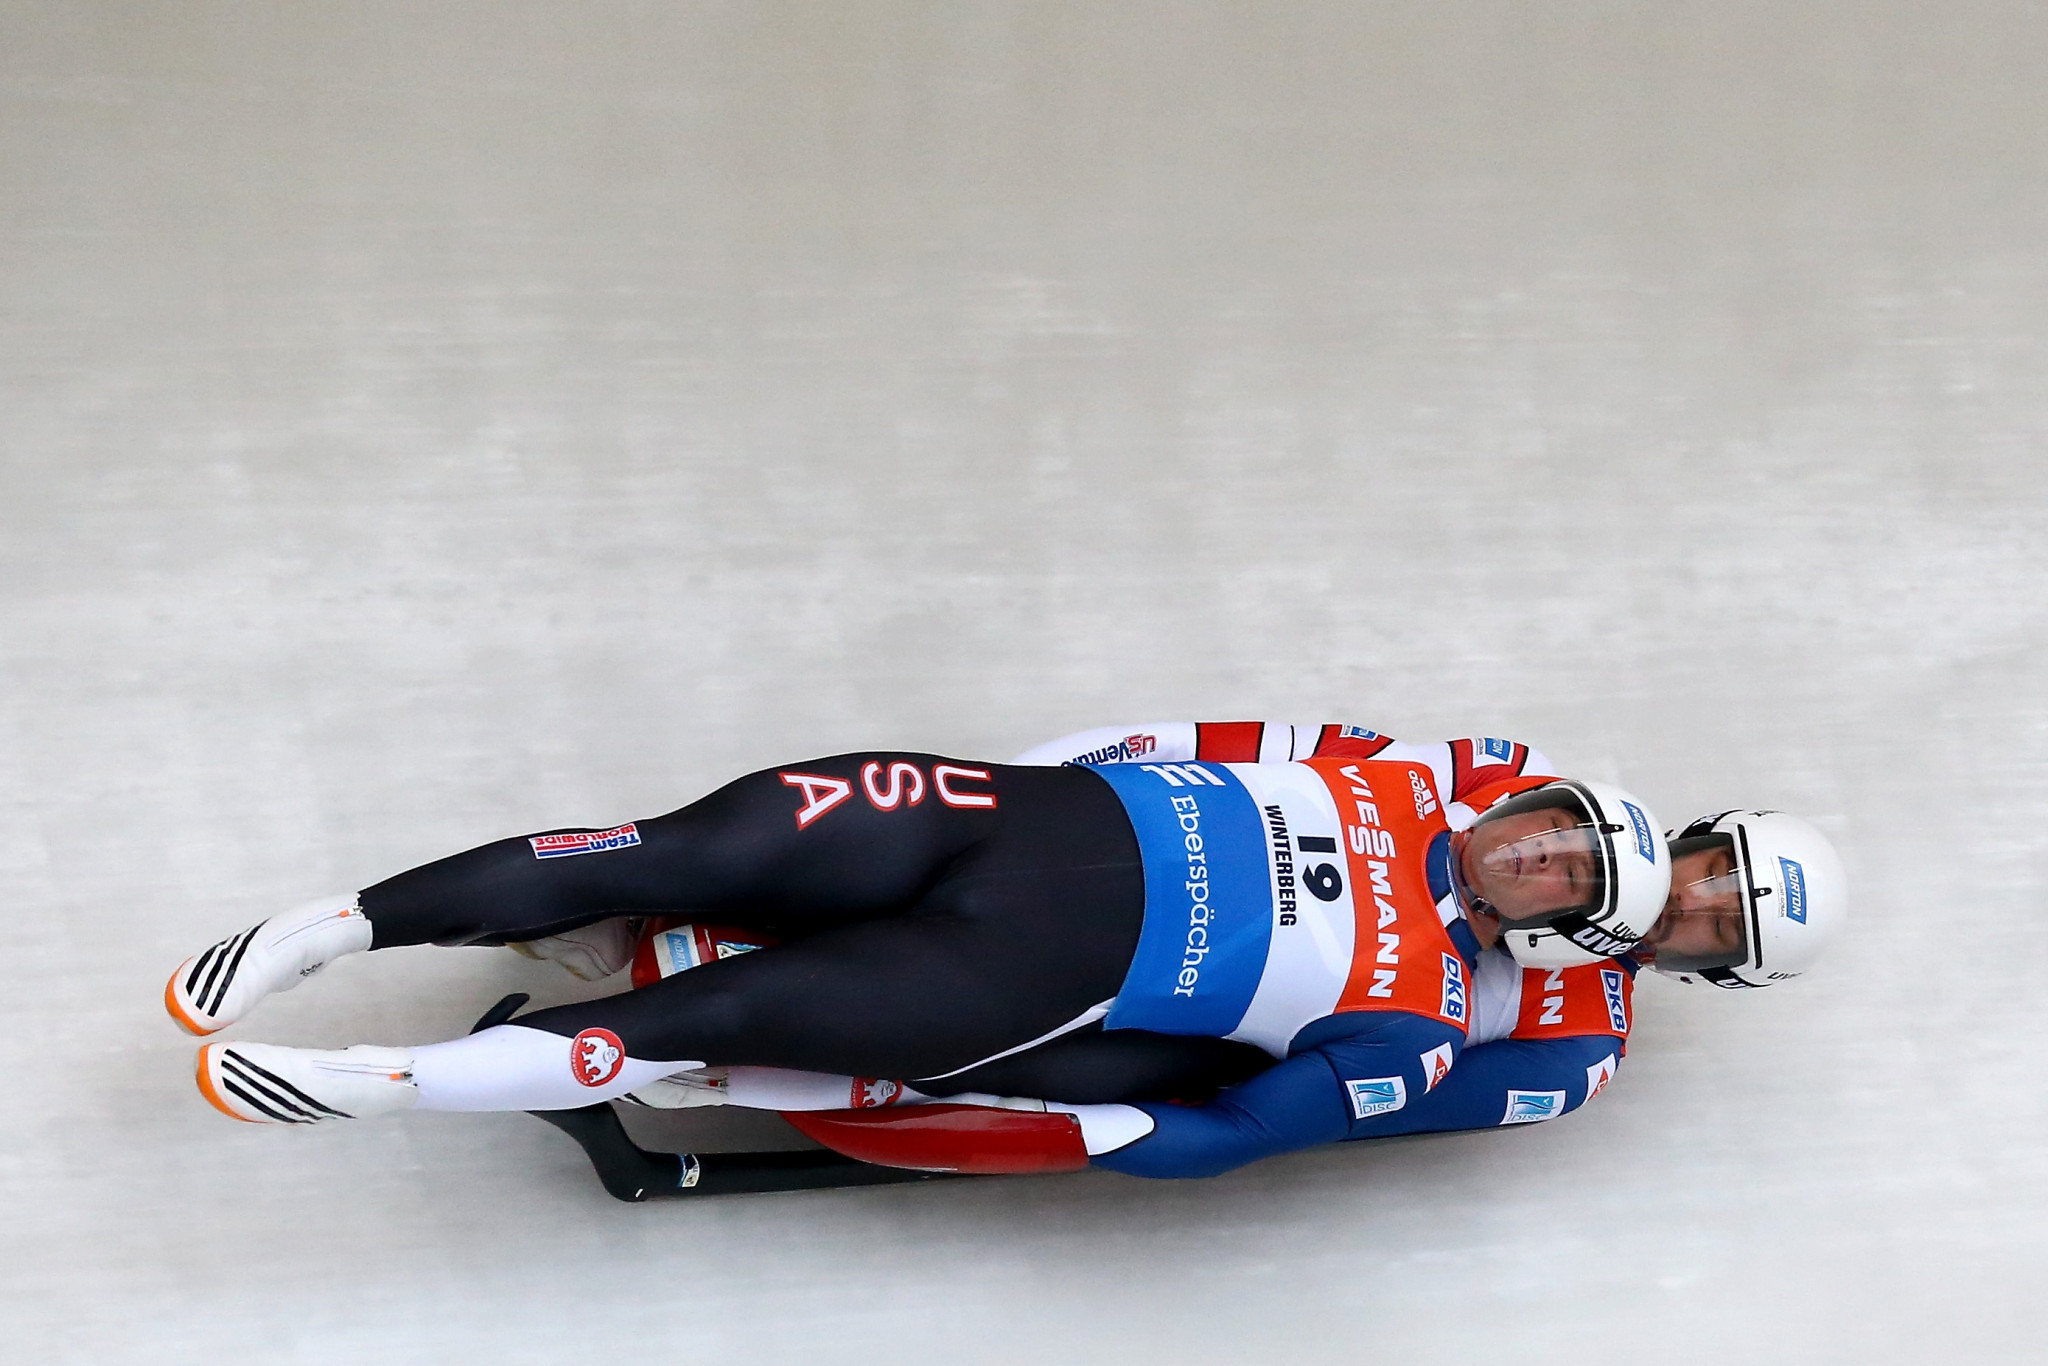 Jayson Terdiman, right, will be involved in the USA Luge slider search event in his hometown in Pennsylvania ©Getty Images